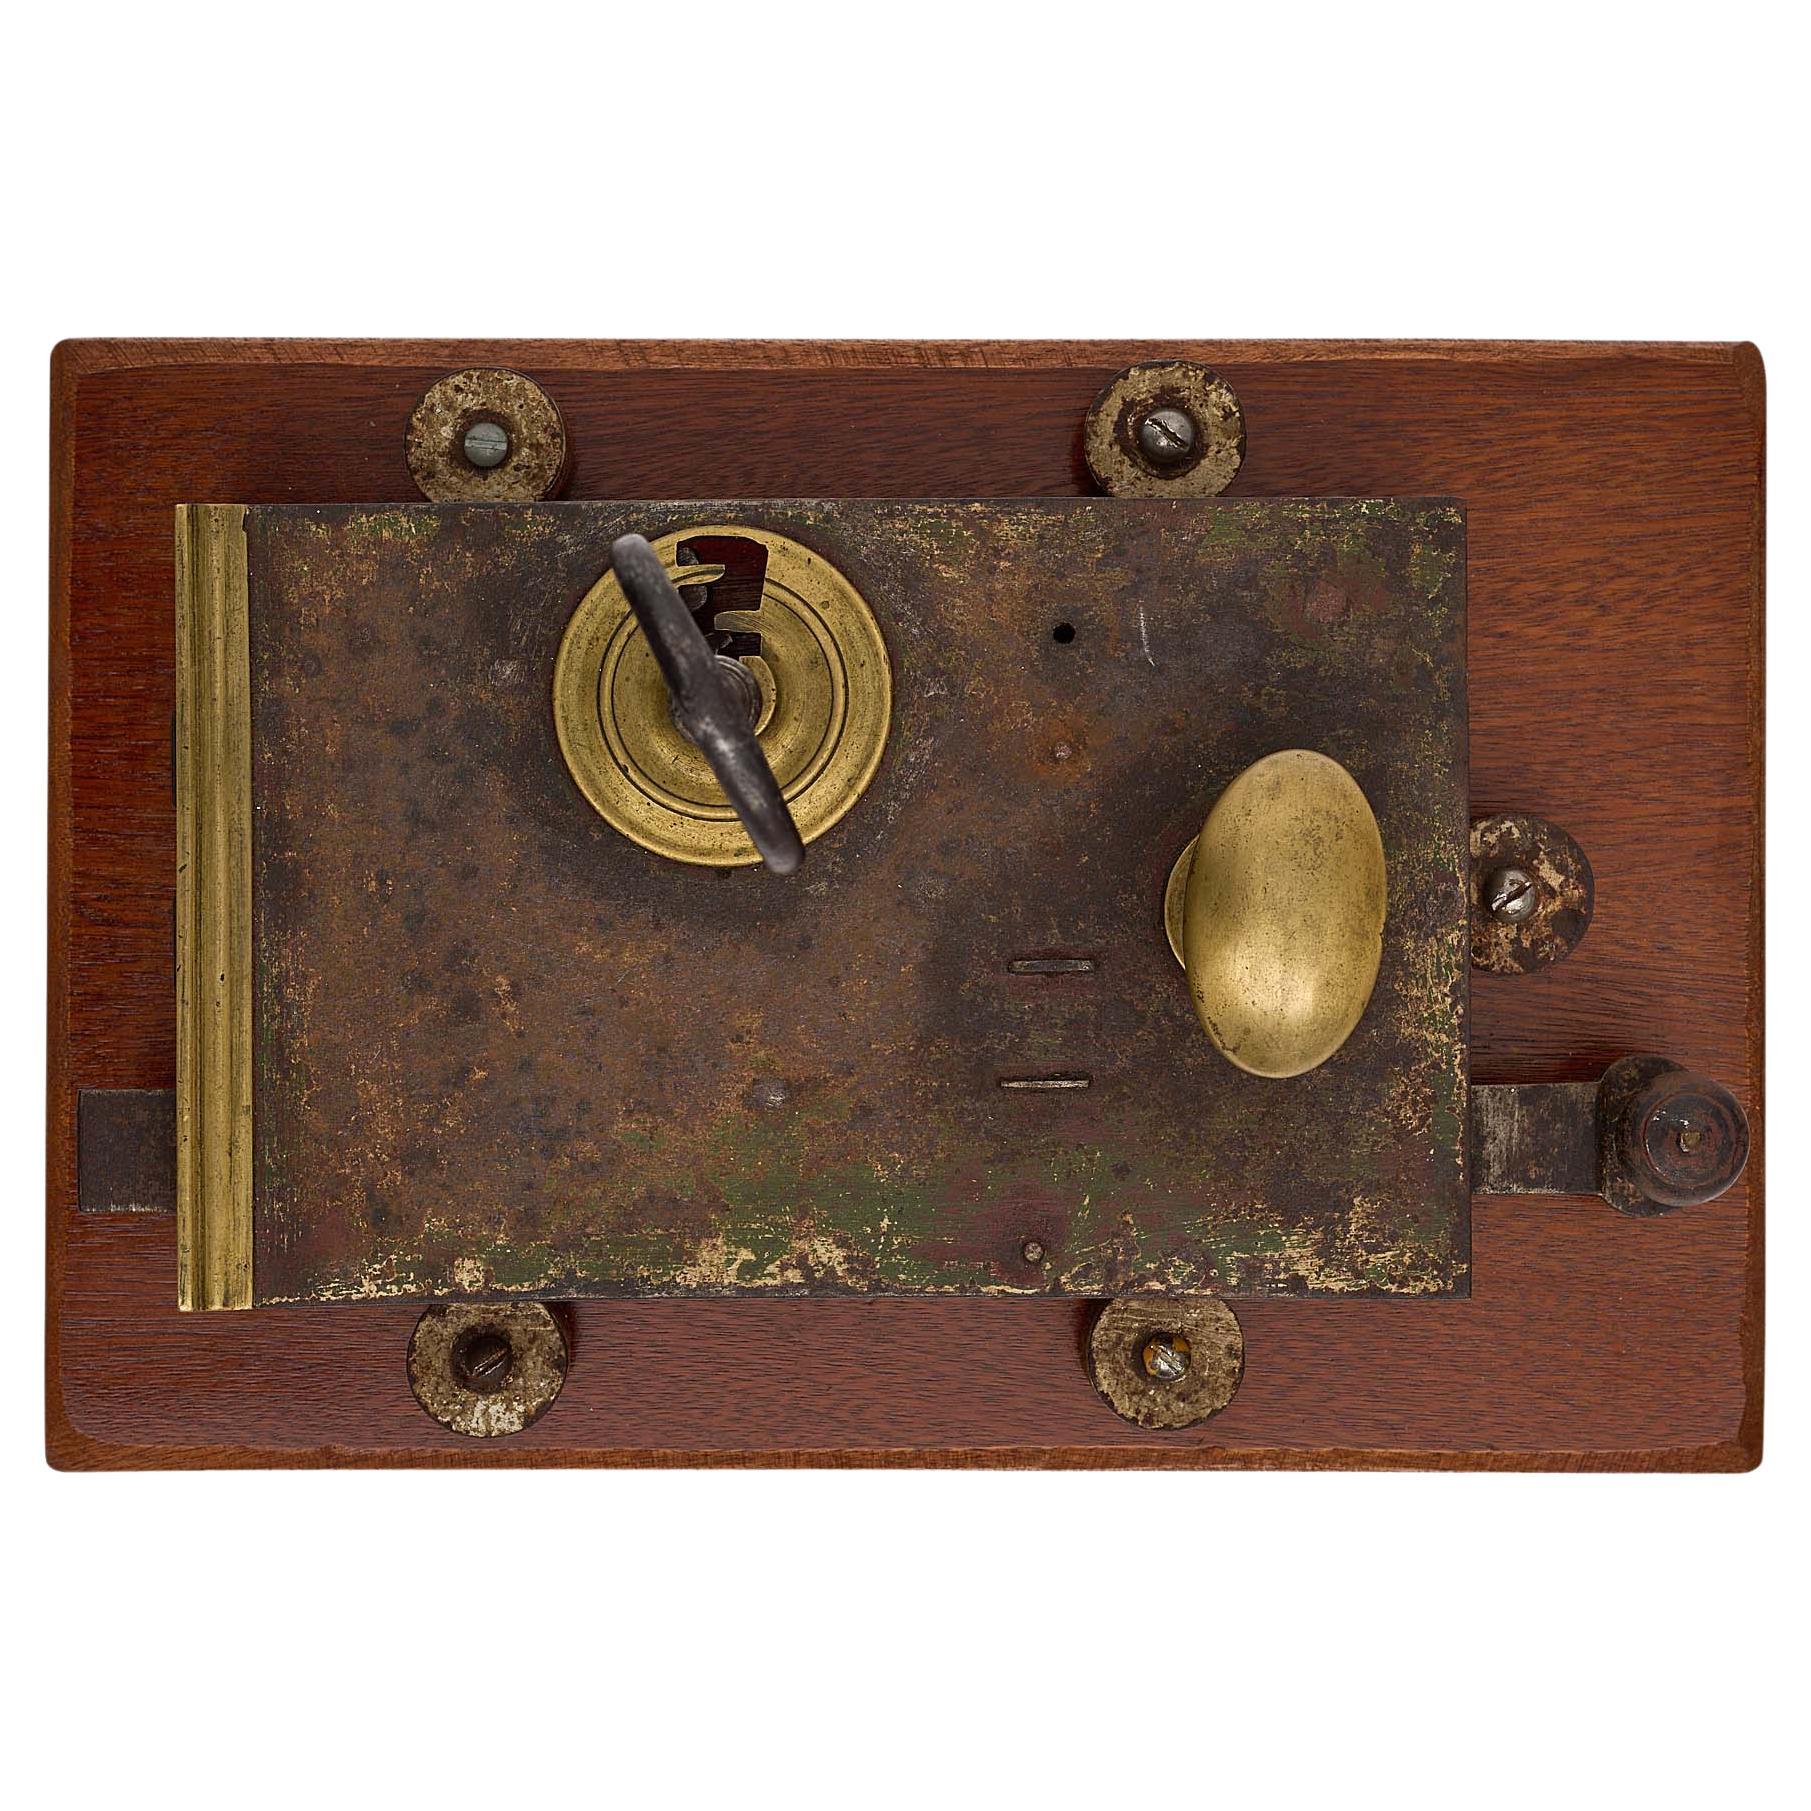 Mounted Antique Mansion Lock and Key For Sale